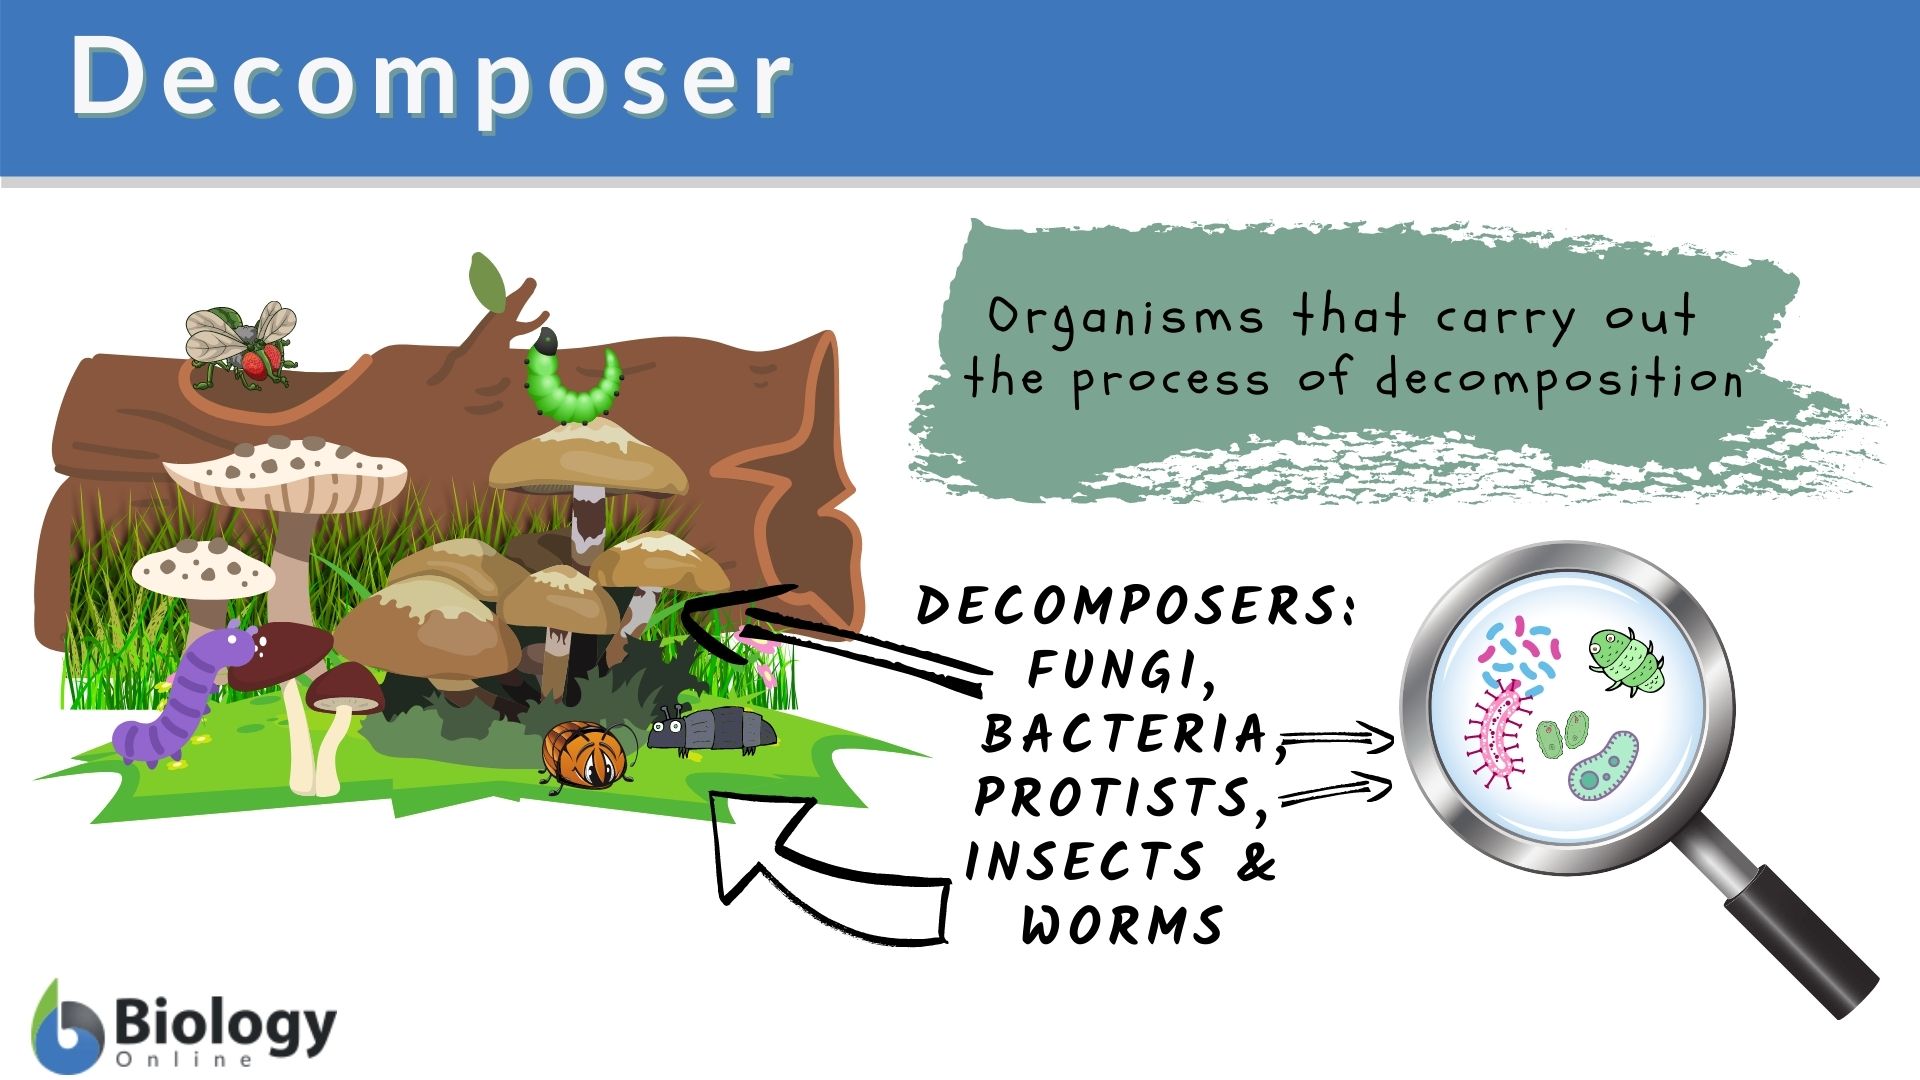 I. Introduction to Decomposers